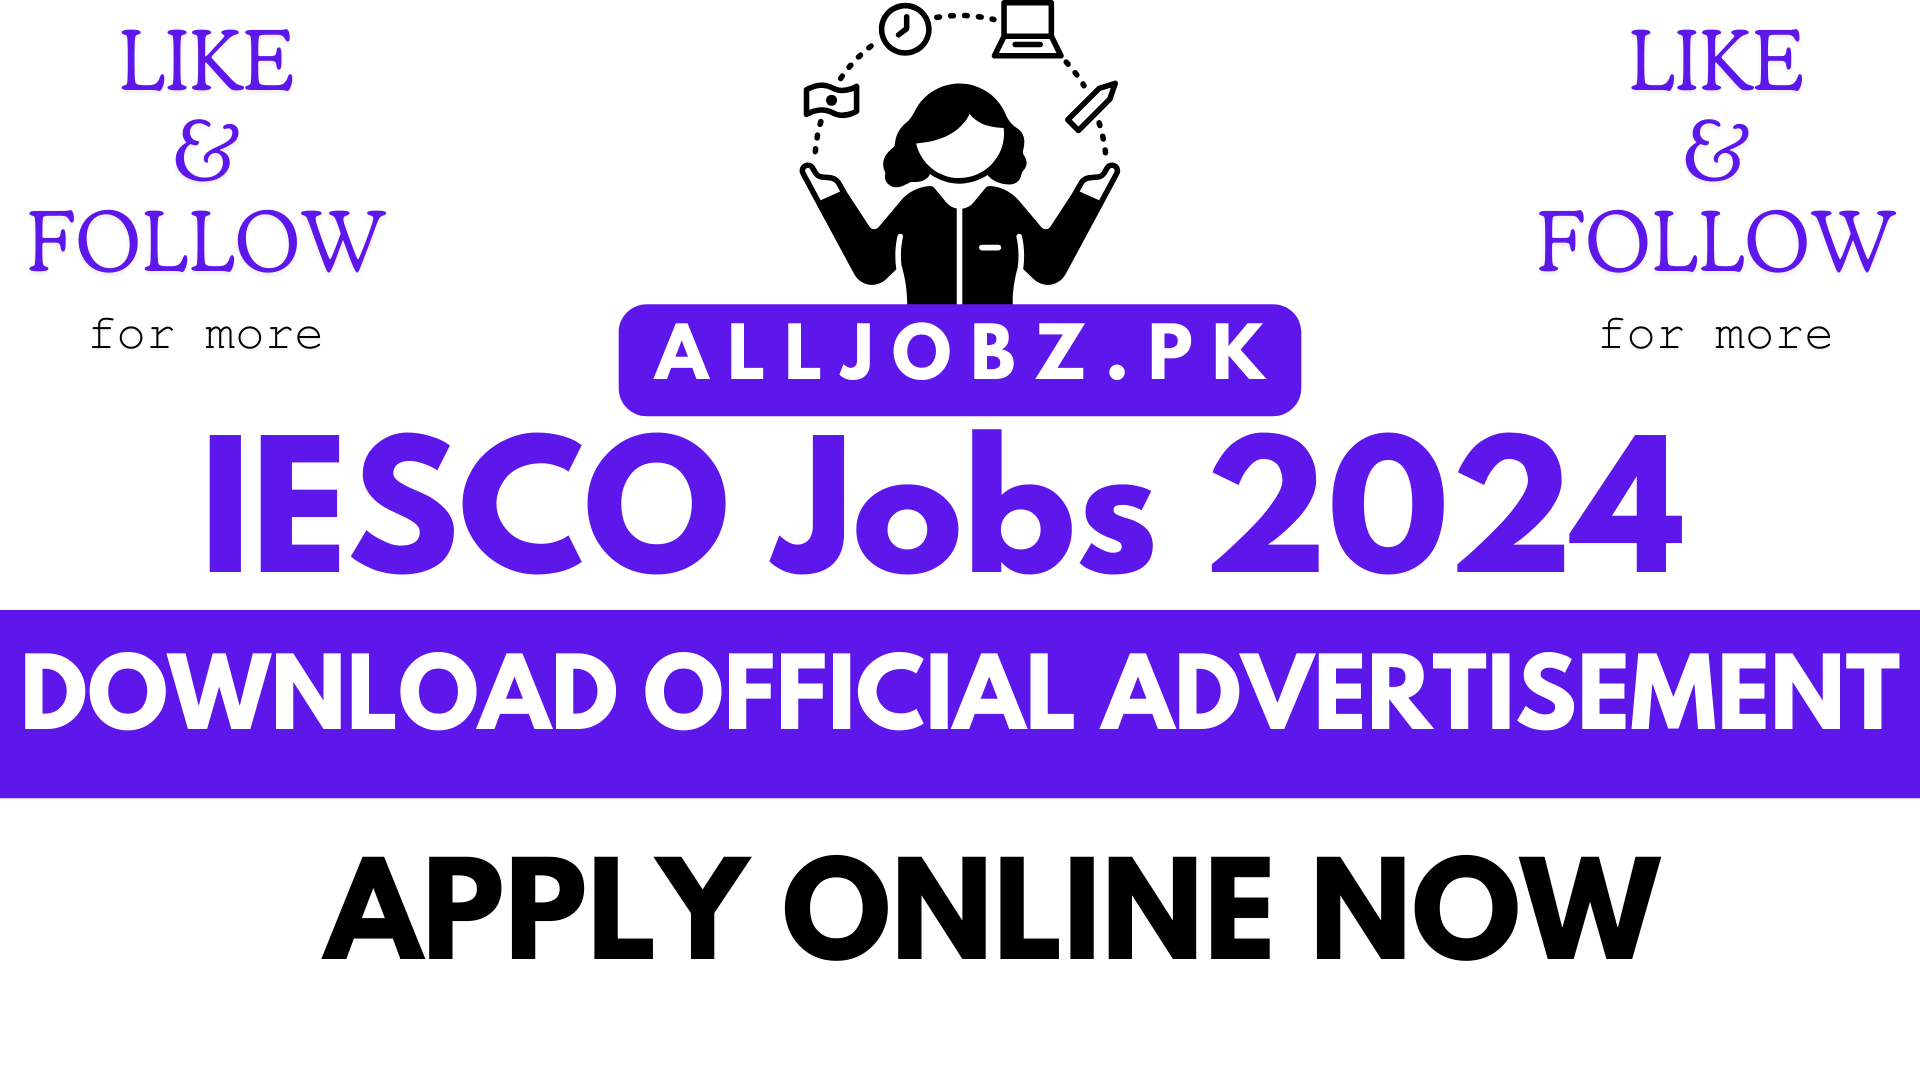 Islamabad Electric Supply Company Jobs 2024, Iesco, Islamabad Electric Supply Company, Power Distribution, Pakistan, Customers, Revenue, Districts, Rawalpindi, Murree, Attock, Jhelum, Chakwal, C-Level Positions, Leadership, Chief Commercial Advisor, Chief Hr &Amp; Career Planning Officer, Chief Supply Chain Management Officer, Chief Technical/Engineering Advisor, Chief It Officer, Qualifications, Experience, Recruitment, Opportunity, Expertise, Sales, Client Relationship Management, Human Resources, Supply Chain, Operations, Electrical Engineering, Information Technology, Remuneration, Tenure, Age Limit, Application Process, Eligibility Criteria, Fit And Proper Criteria, Selection Process, Contact Information, Official Advertisement, Electricity Theft, Bill Payment.